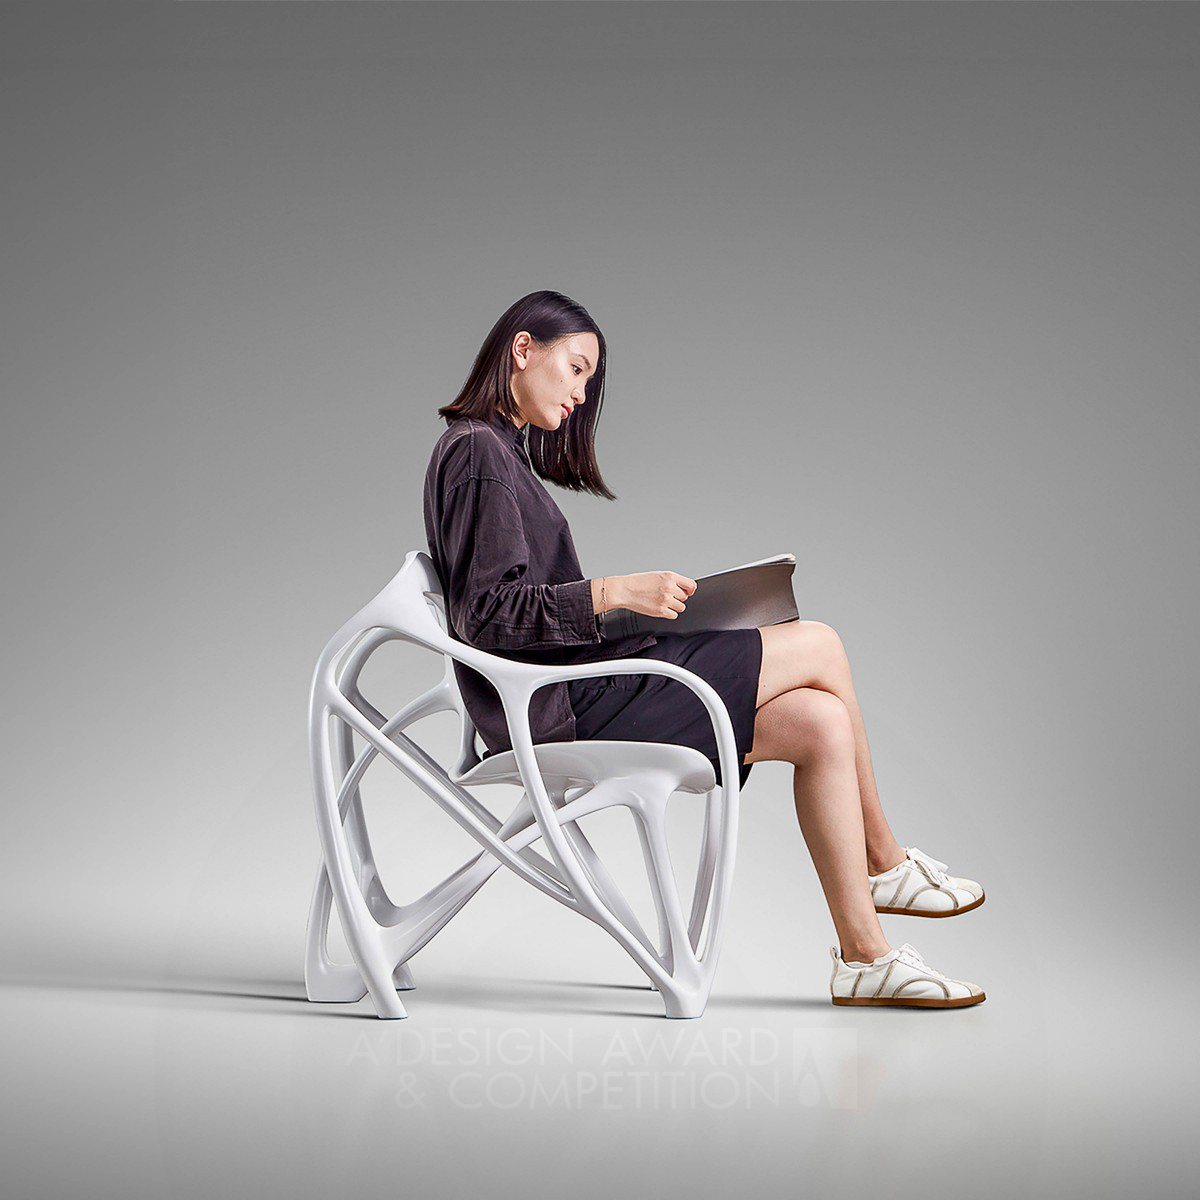 yang siqi wins Silver at the prestigious A' Furniture Design Award with Spidique Chair.